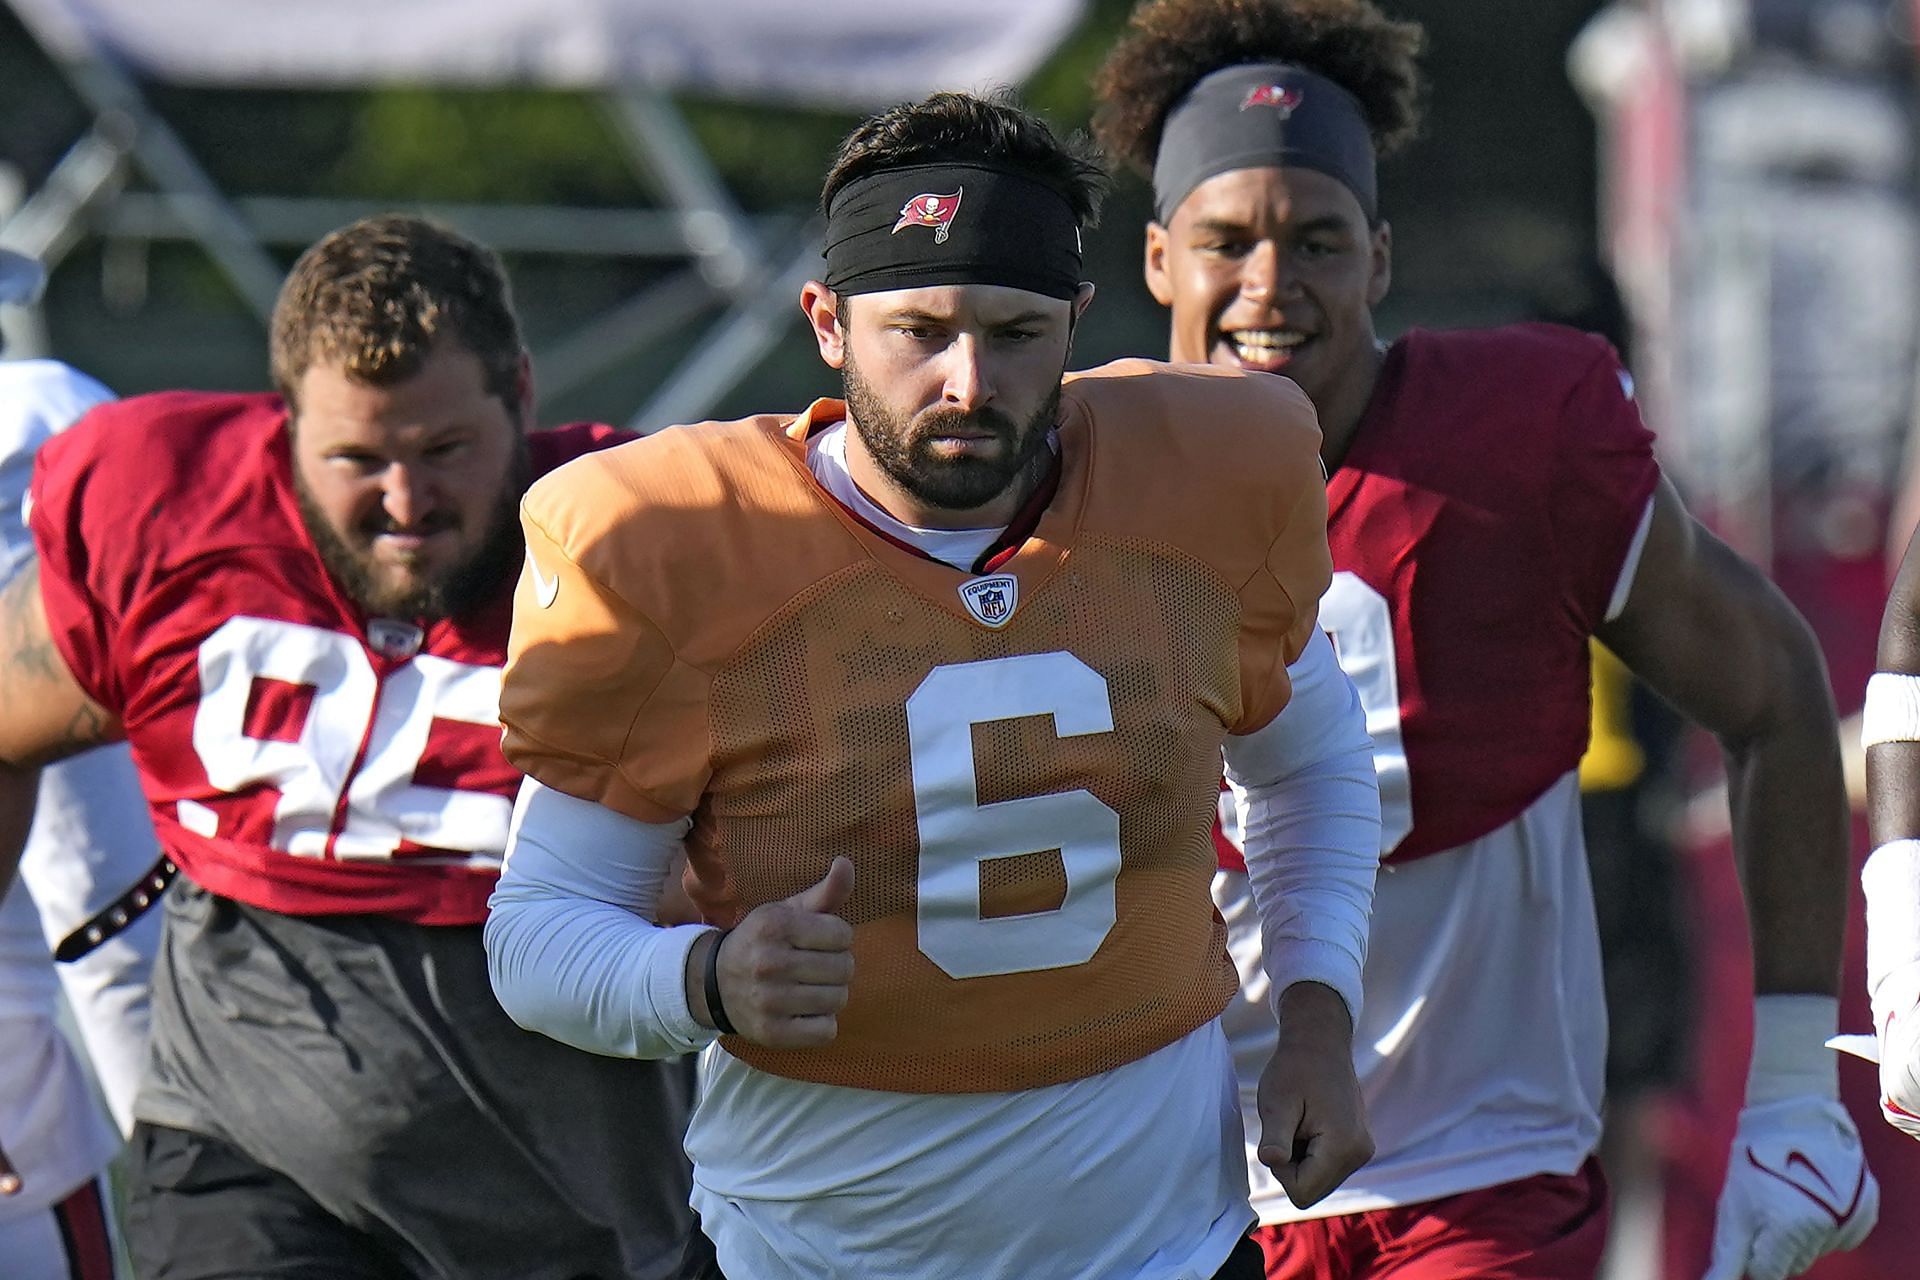 Report: Kyle Trask 'likely' to start Week 1 for the Bucs - Bucs Nation